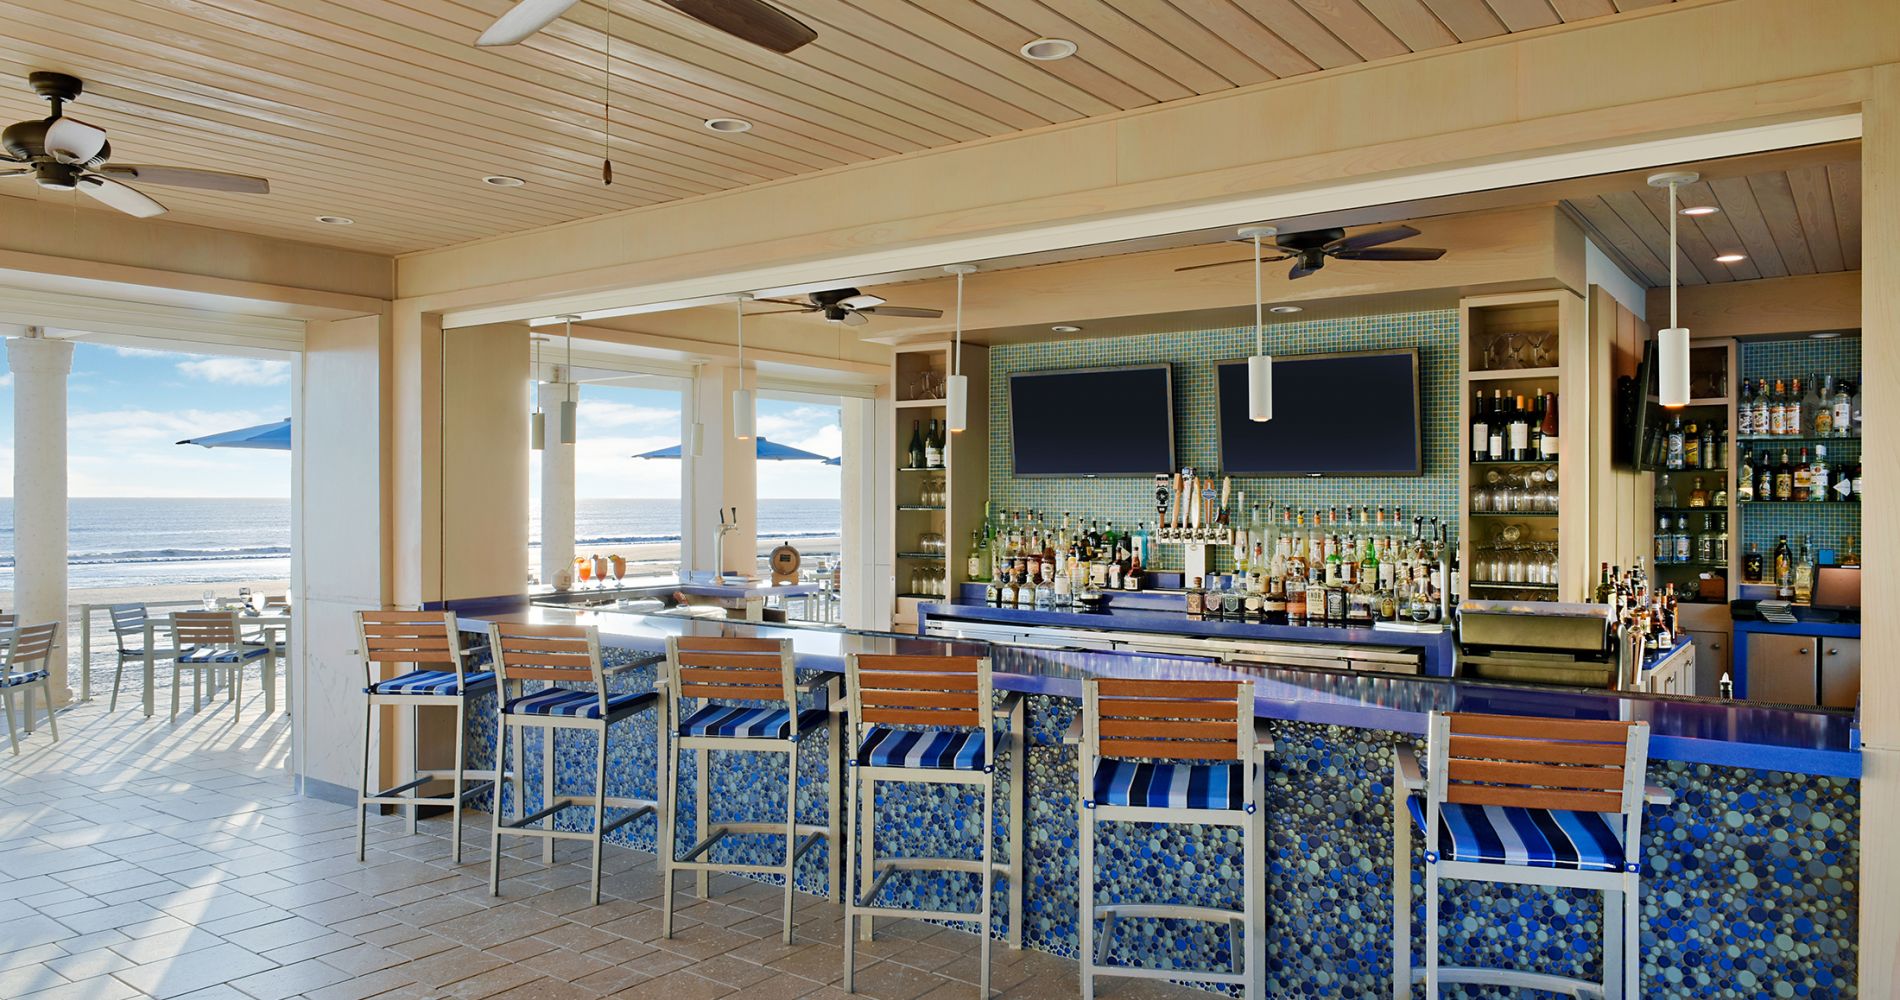 The Surf Deck Upscale Dining Ponte Vedra Beach Resorts